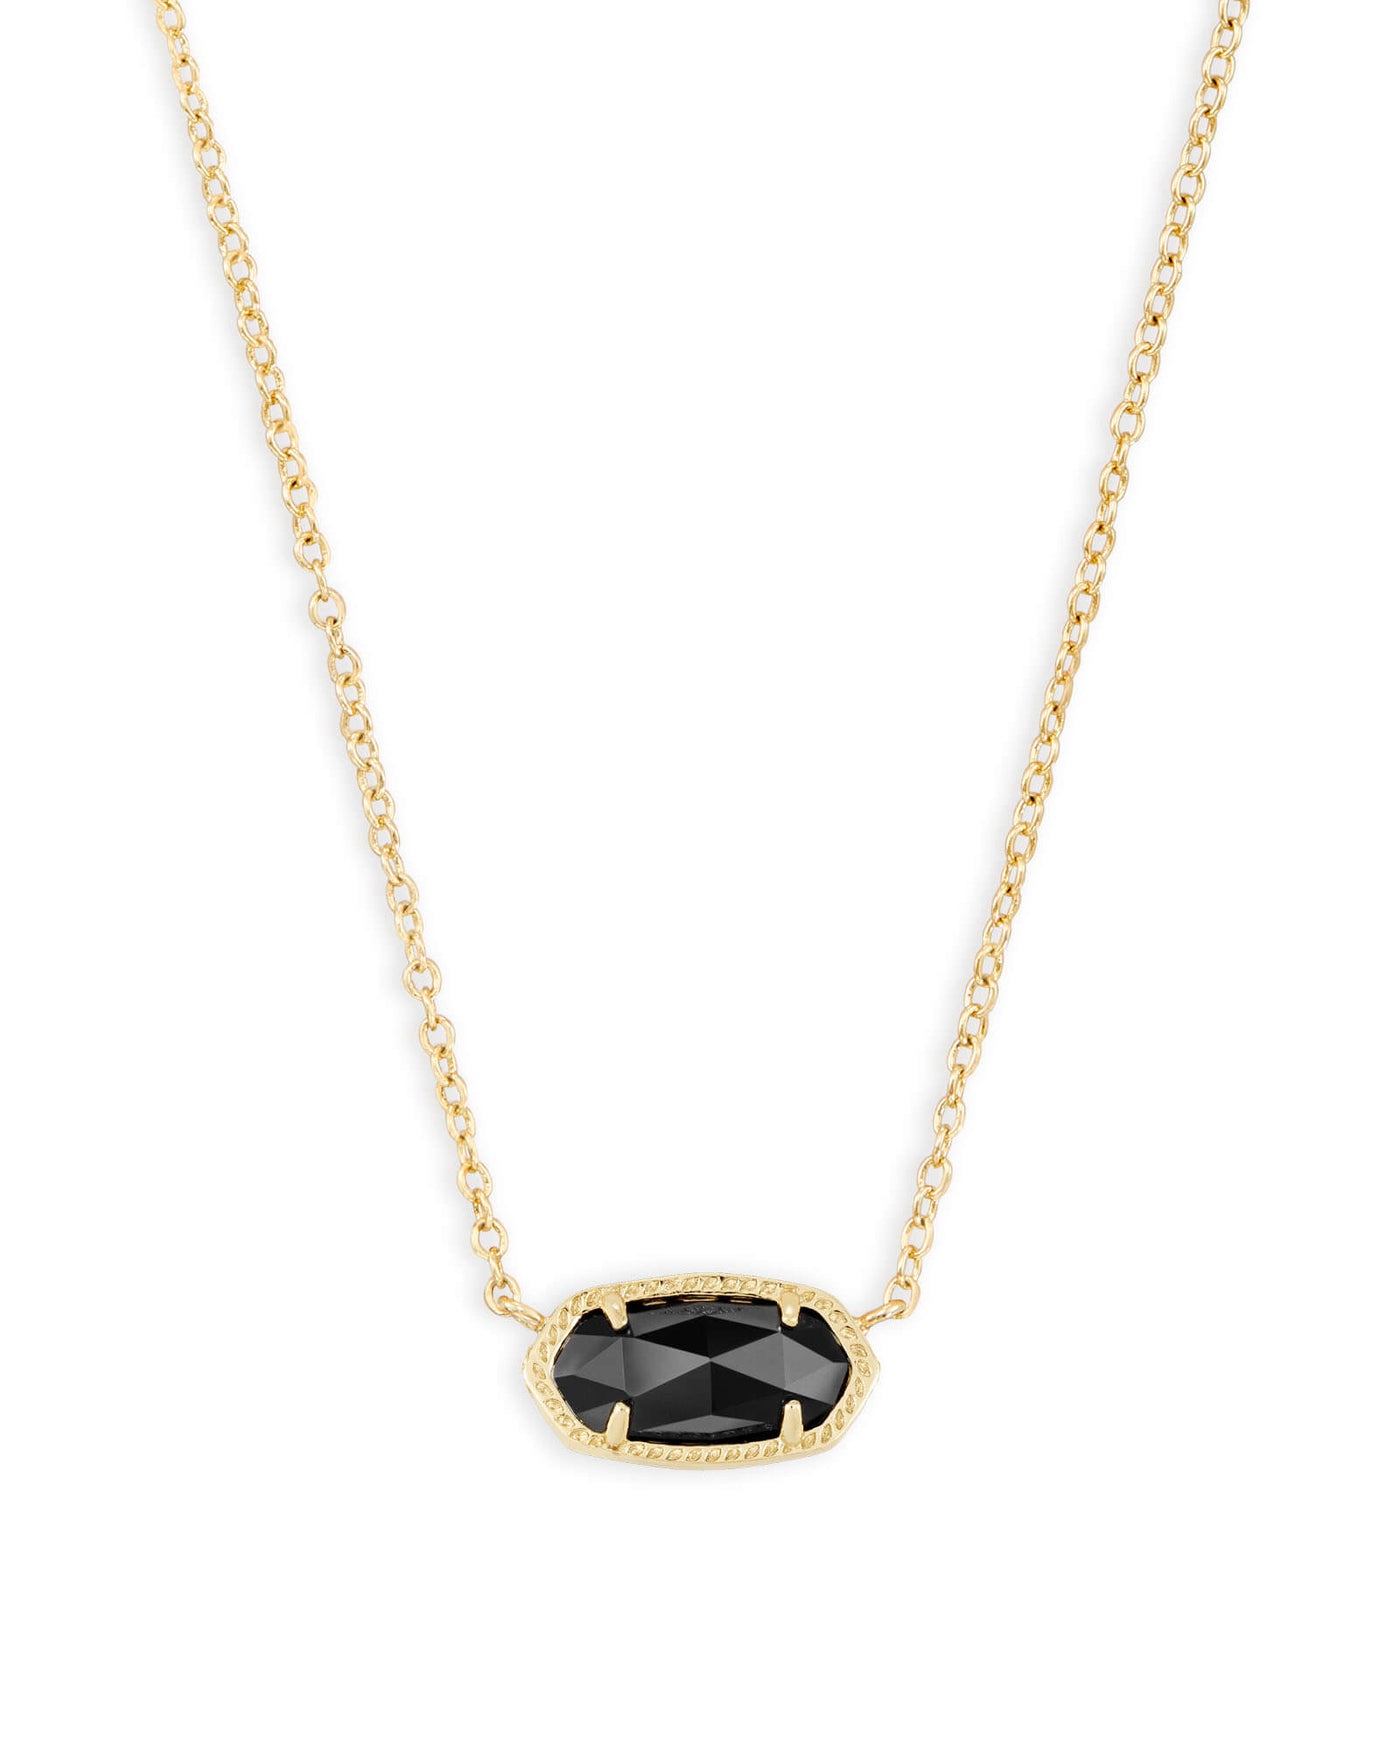 Kendra Scott Elisa Gold Pendant Necklace in Black-Necklaces-Kendra Scott-Market Street Nest, Fashionable Clothing, Shoes and Home Décor Located in Mabank, TX